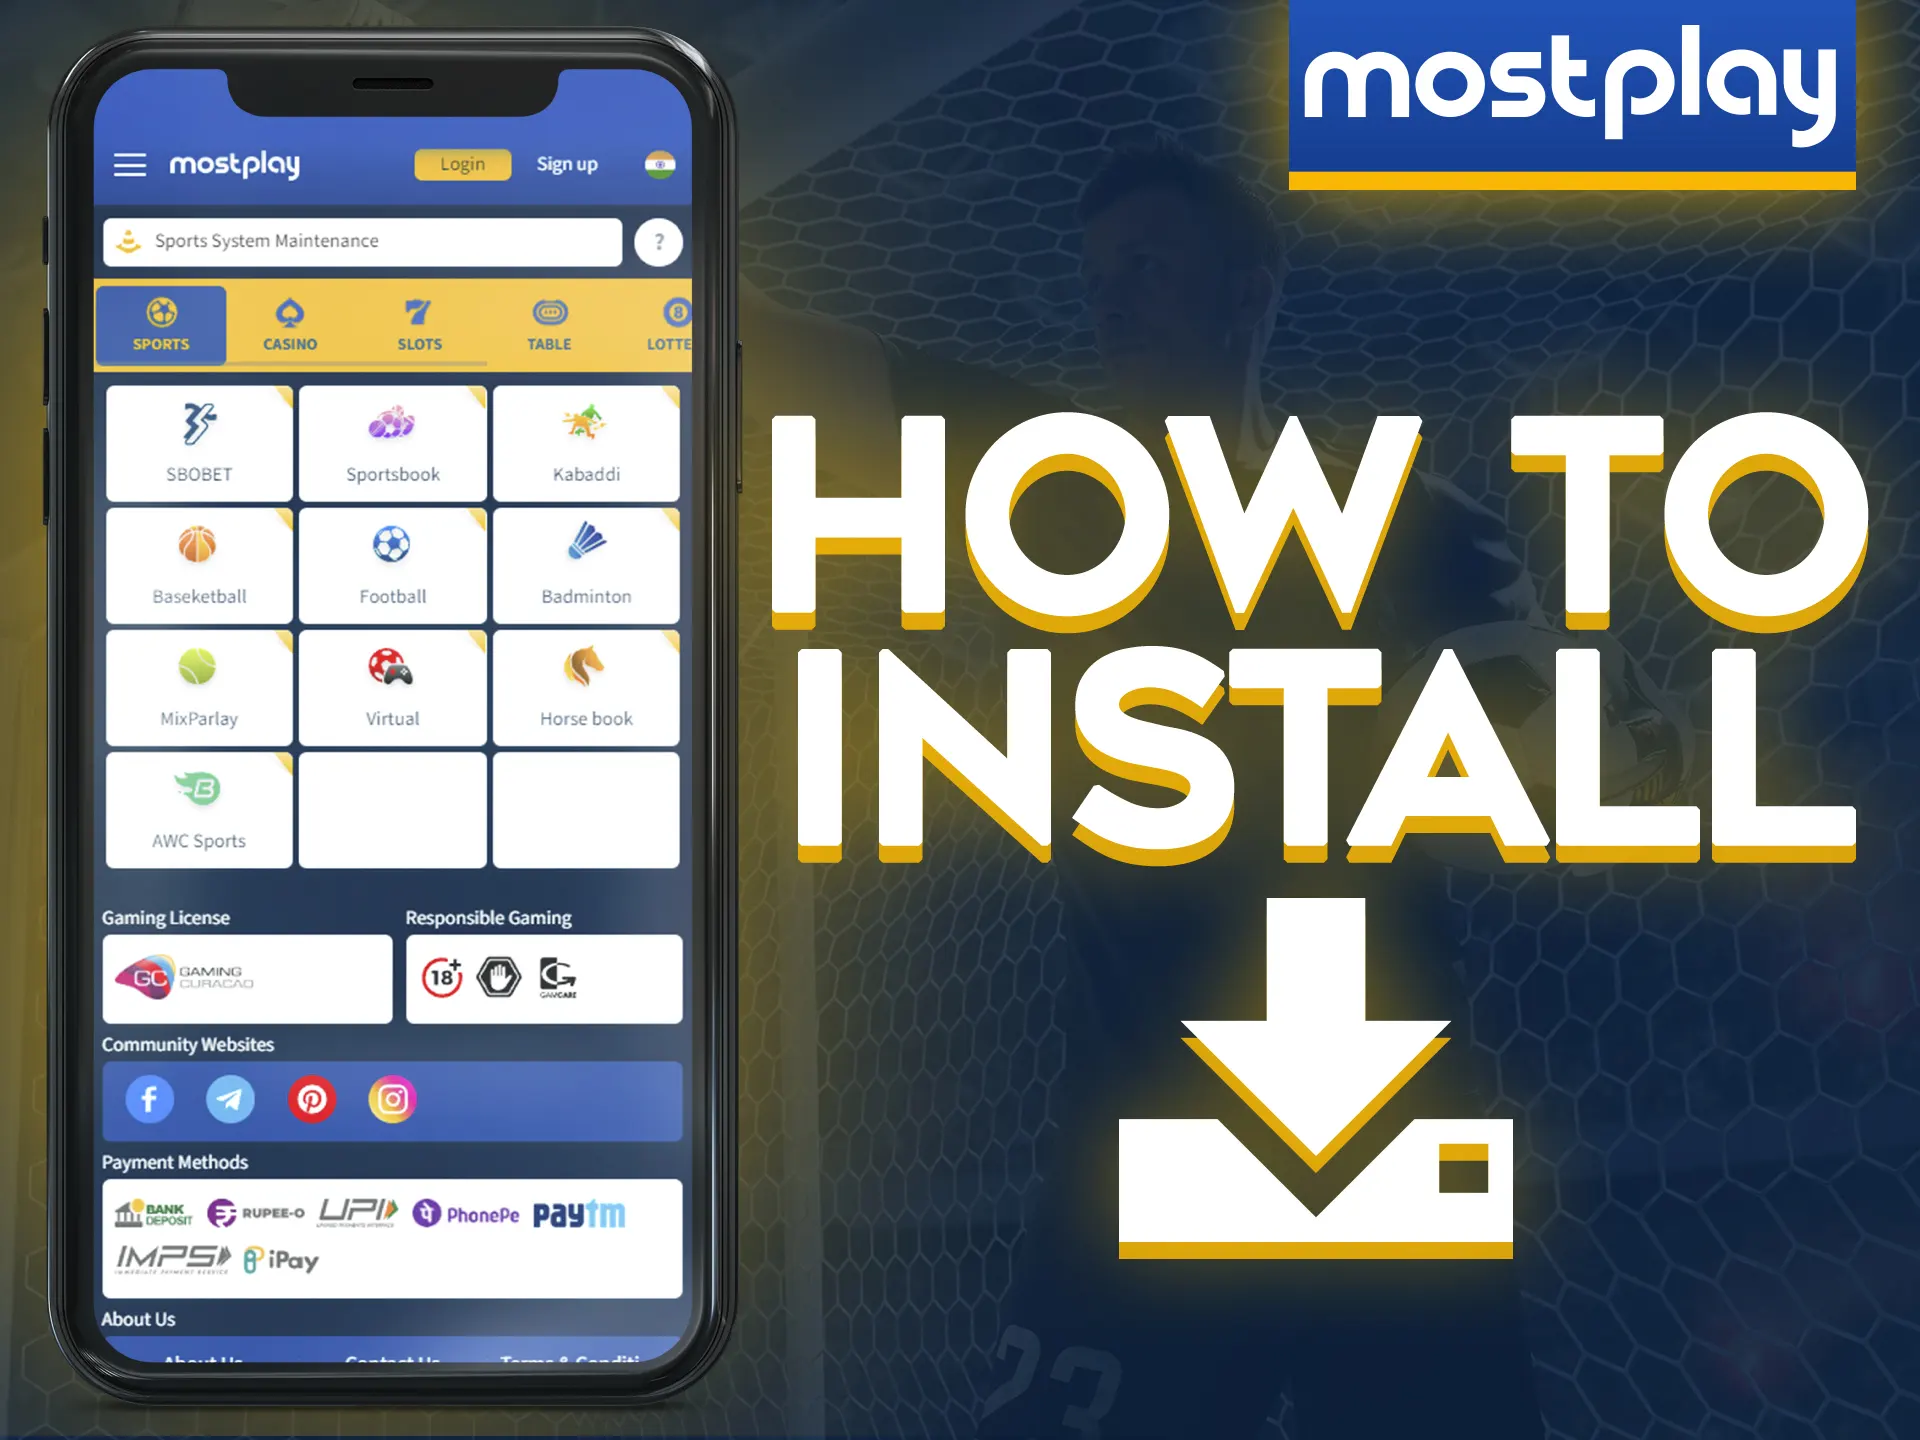 Download and install the Mostplay app on your mobile device.